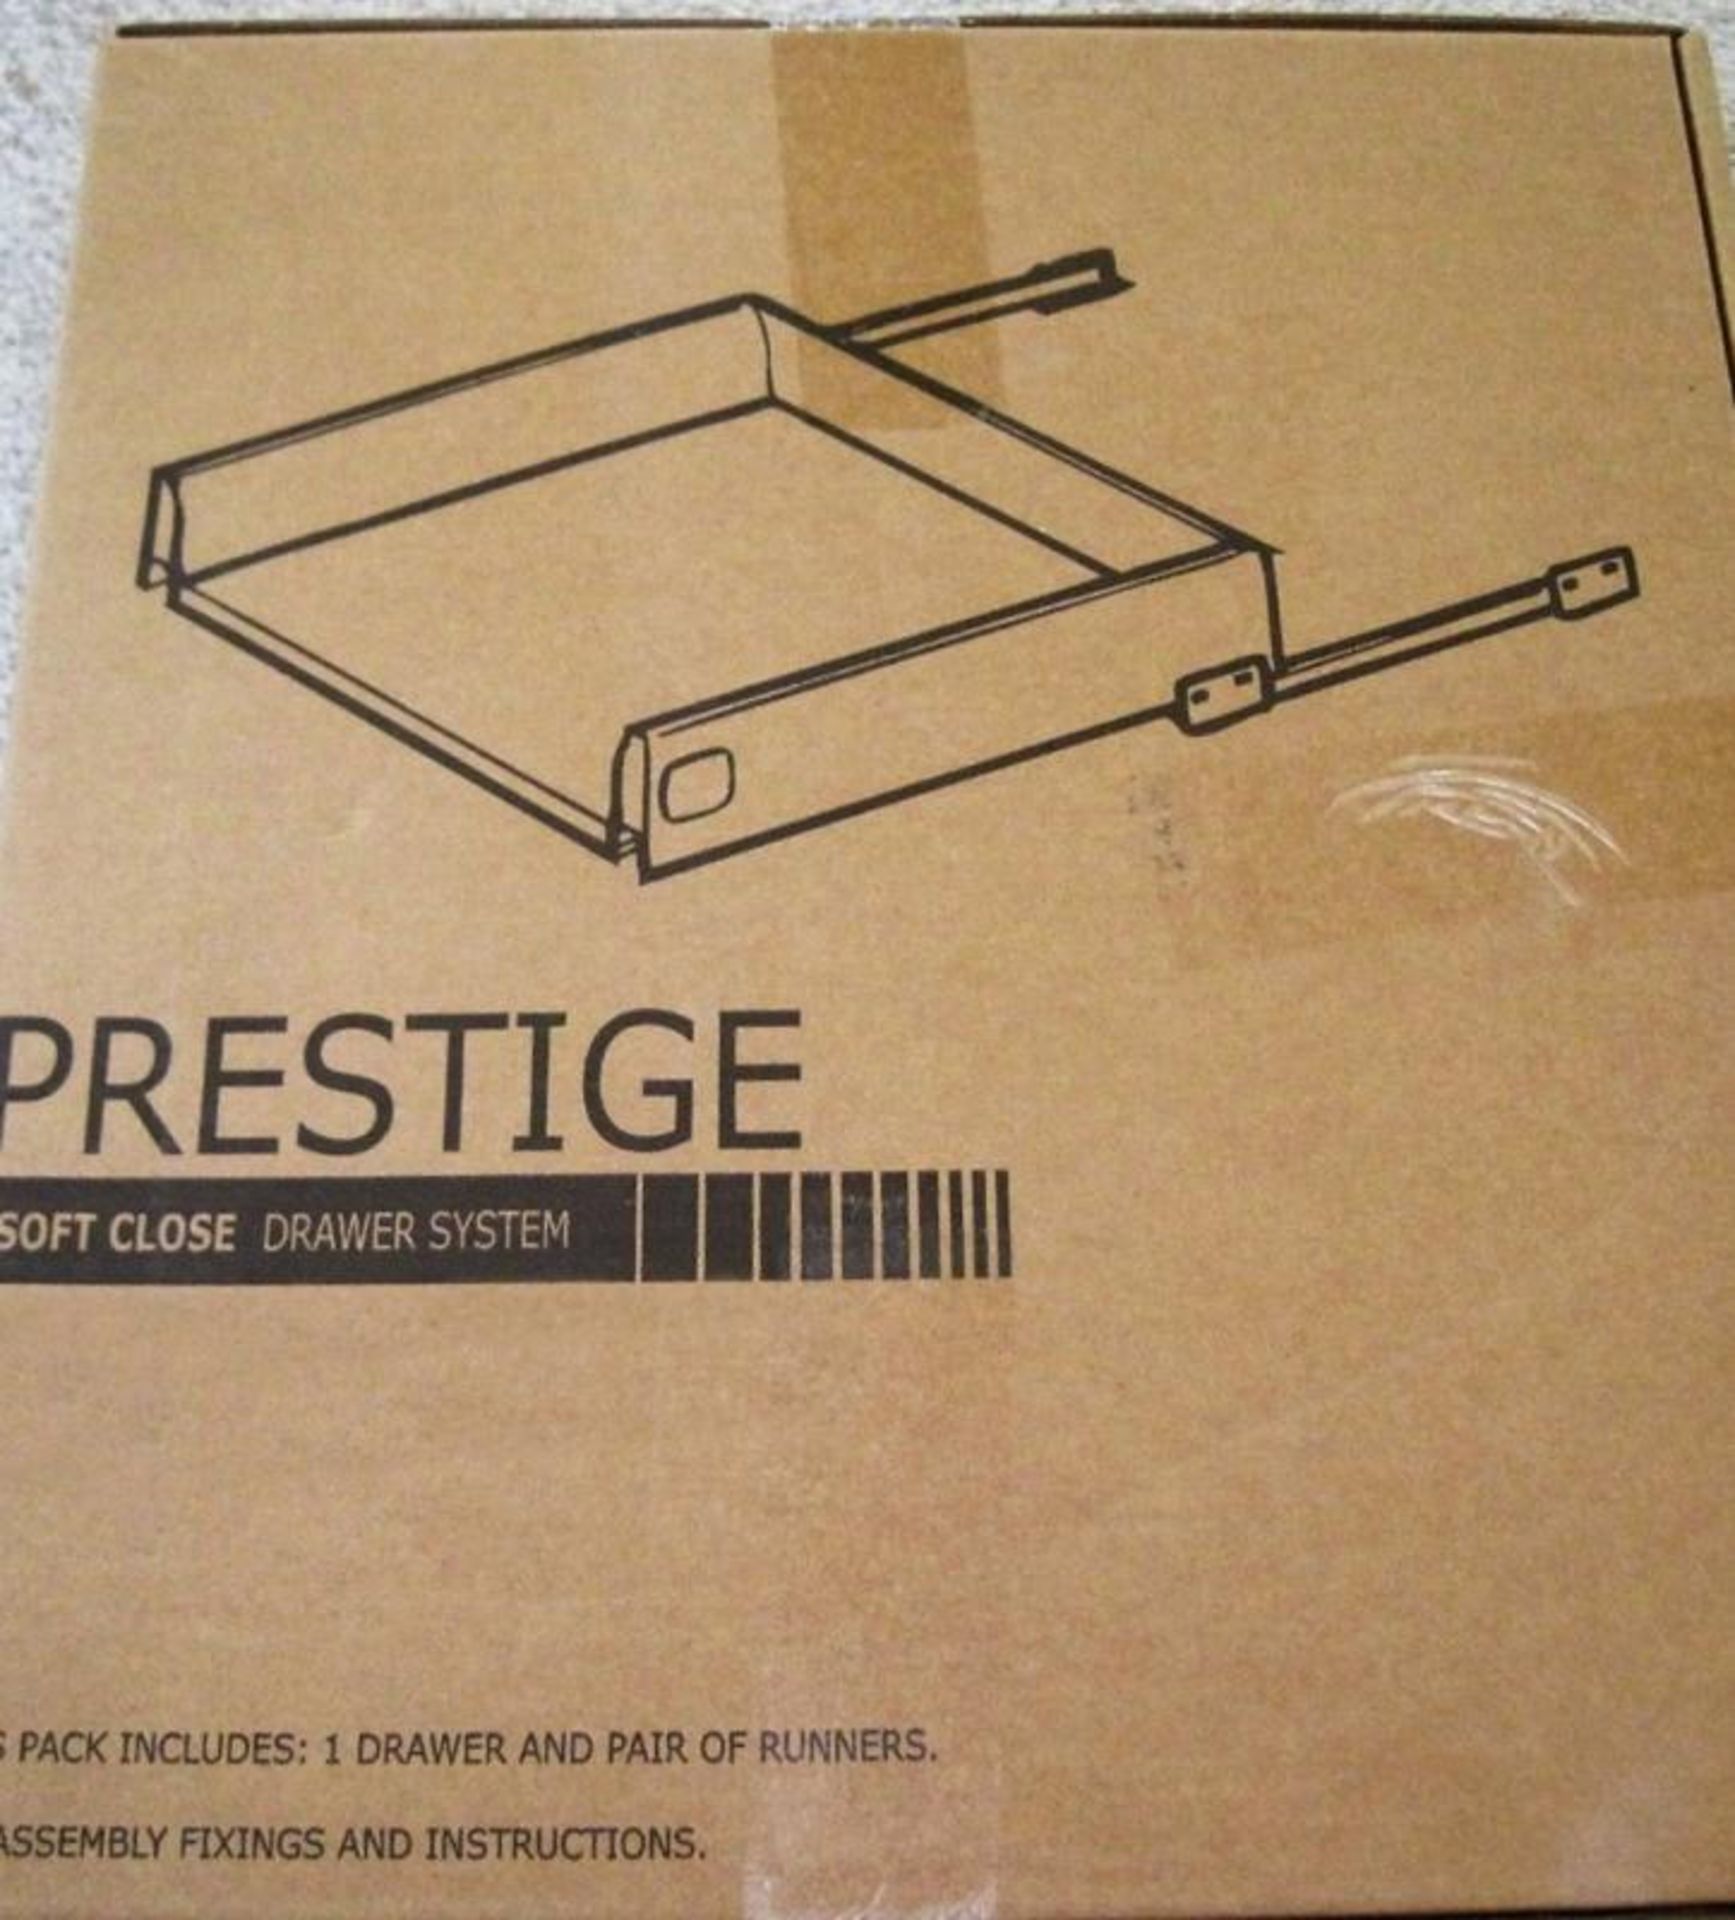 5 x 800mm Soft Close Kitchen Drawer Packs - B&Q Prestige - Brand New Stock - Features Include - Image 2 of 2